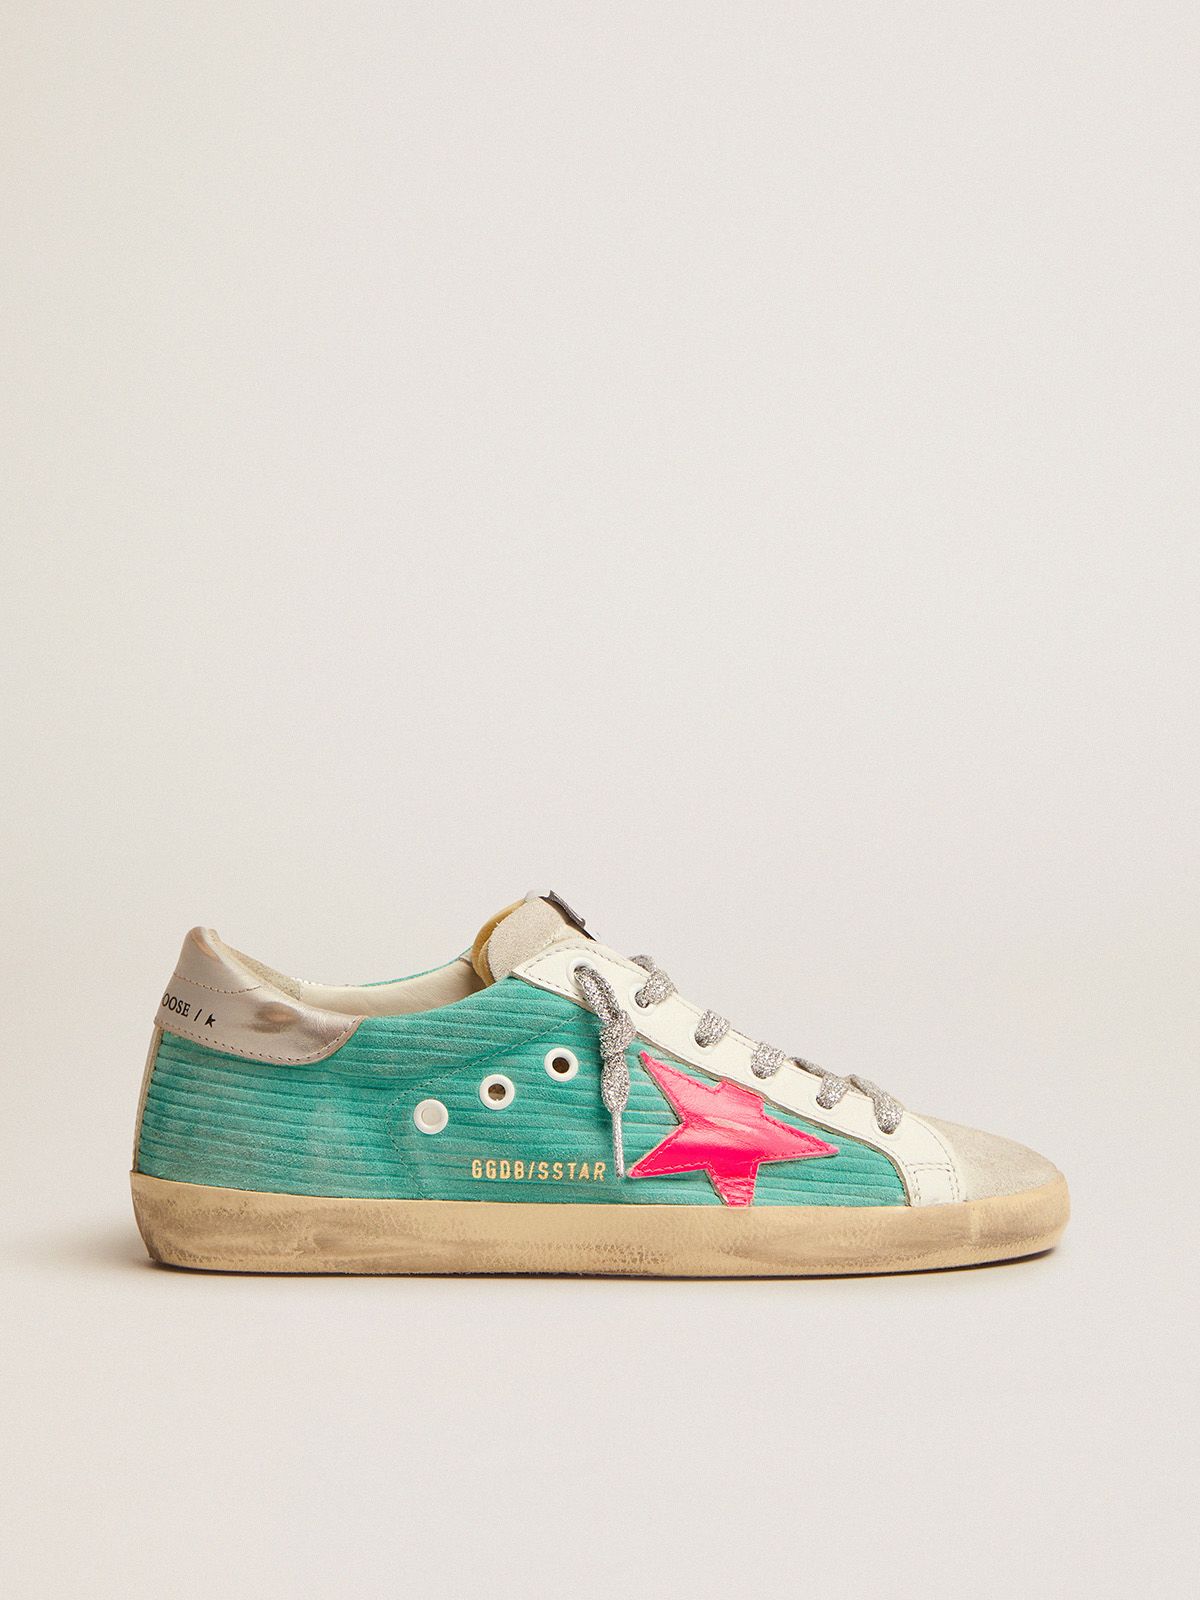 Sneakers Uomo Golden Goose Super-Star sneakers in turquoise suede with corduroy print and fluorescent pink leather star